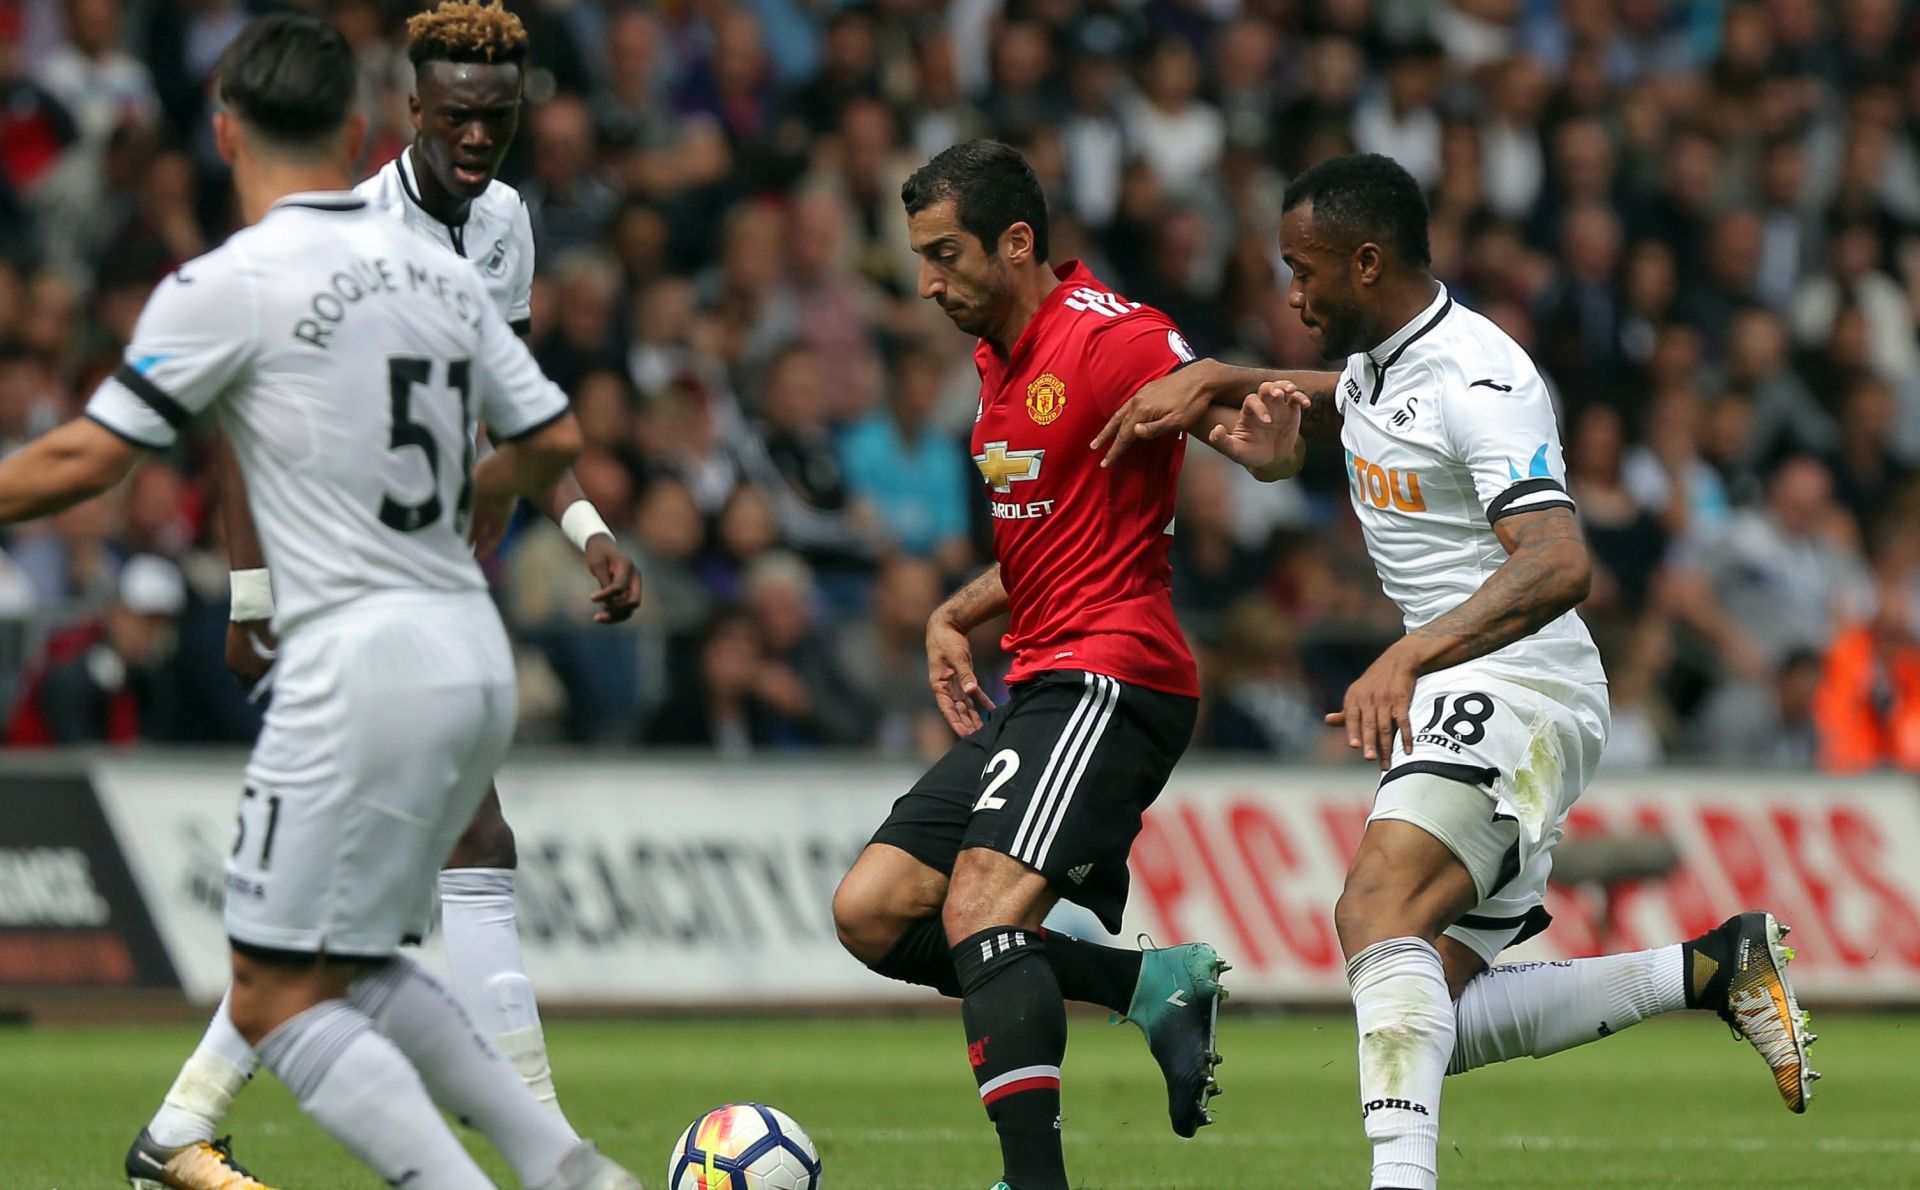 epa06151228 Henrikh Mkhitaryan of Manchester United (C) challenged by Jordan Ayew of Swansea City Jordan Ayew of Swansea City during the English Premier League soccer match between Swansea City and Manchester United at Liberty Stadium, Swansea, Britain, 19 August 2017.  EPA/DIMITRIS LEGAKIS EDITORIAL USE ONLY. No use with unauthorized audio, video, data, fixture lists, club/league logos or 'live' services. Online in-match use limited to 75 images, no video emulation. No use in betting, games or single club/league/player publications